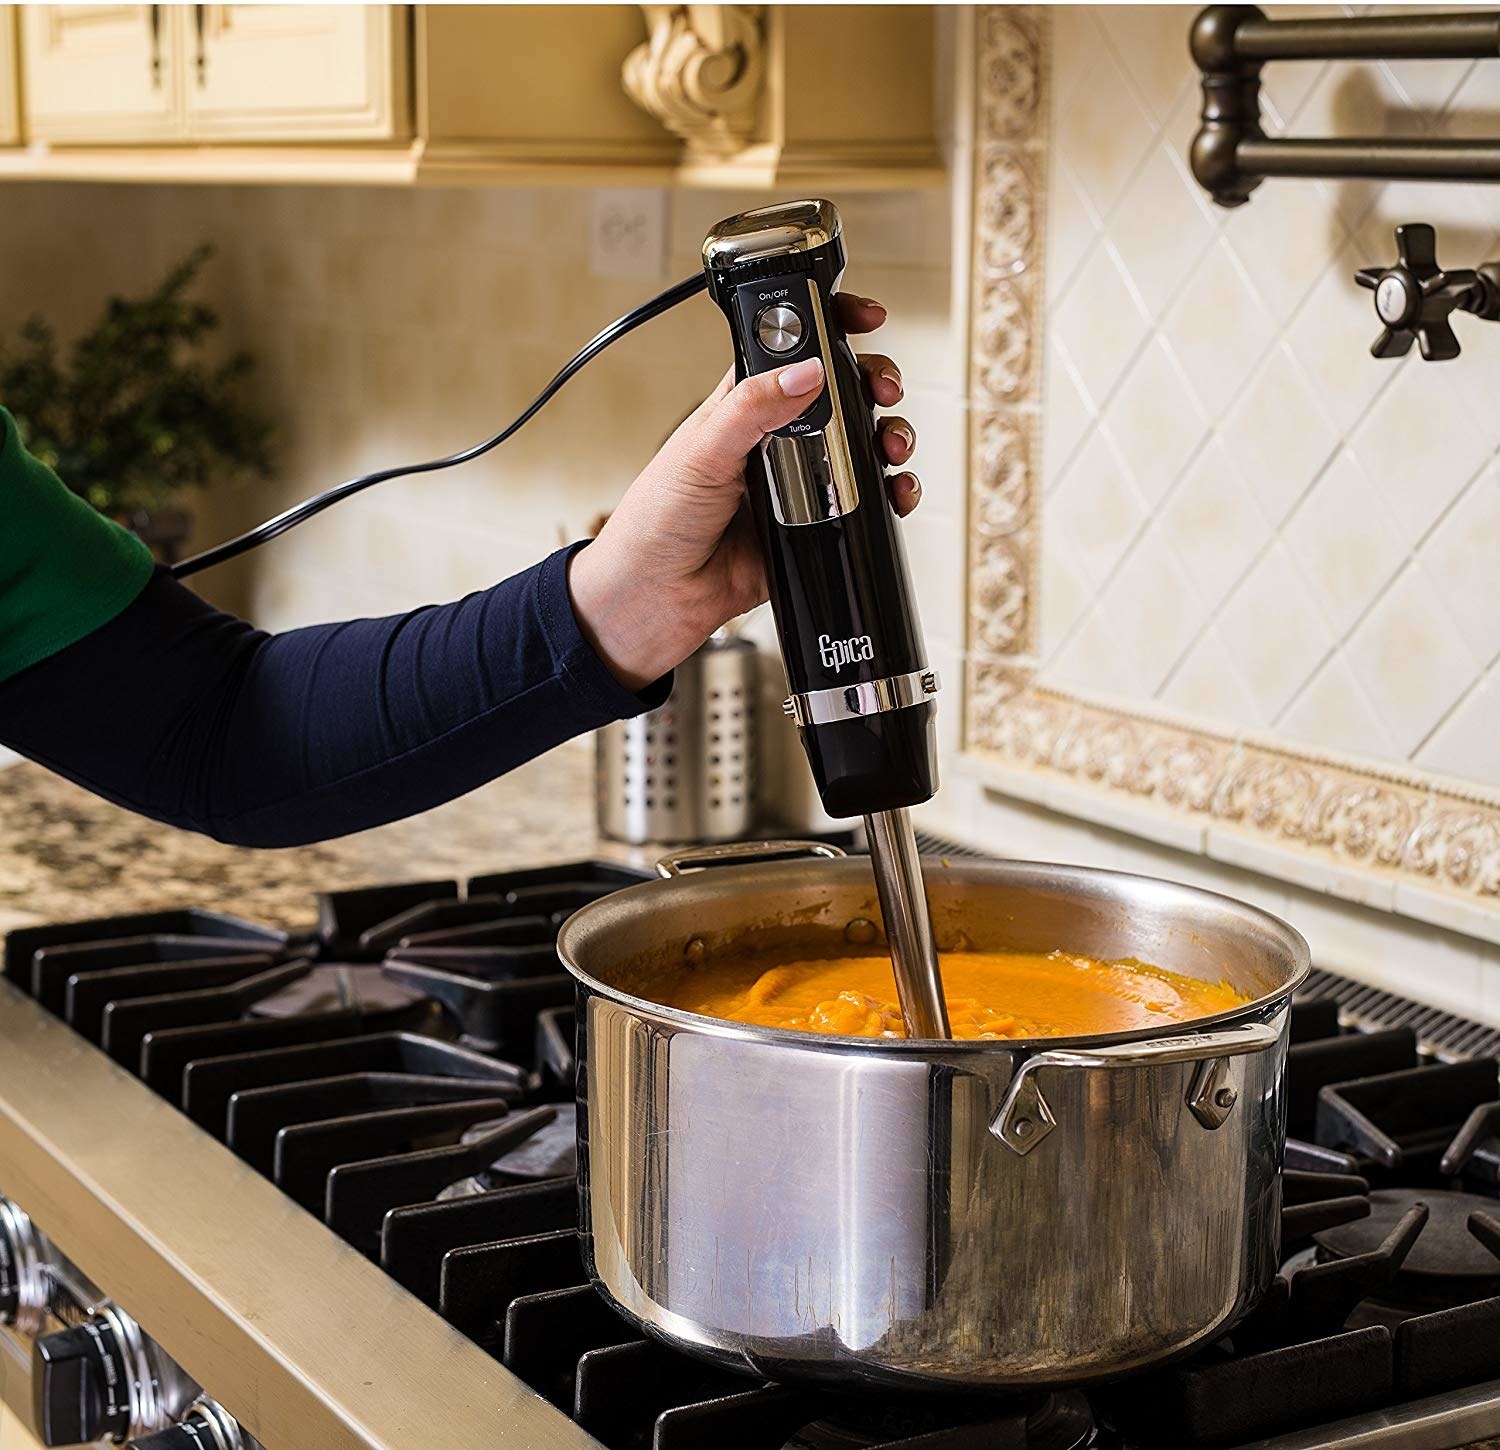 51 Cool and Quirky Kitchen Gadgets That Are Actually Useful